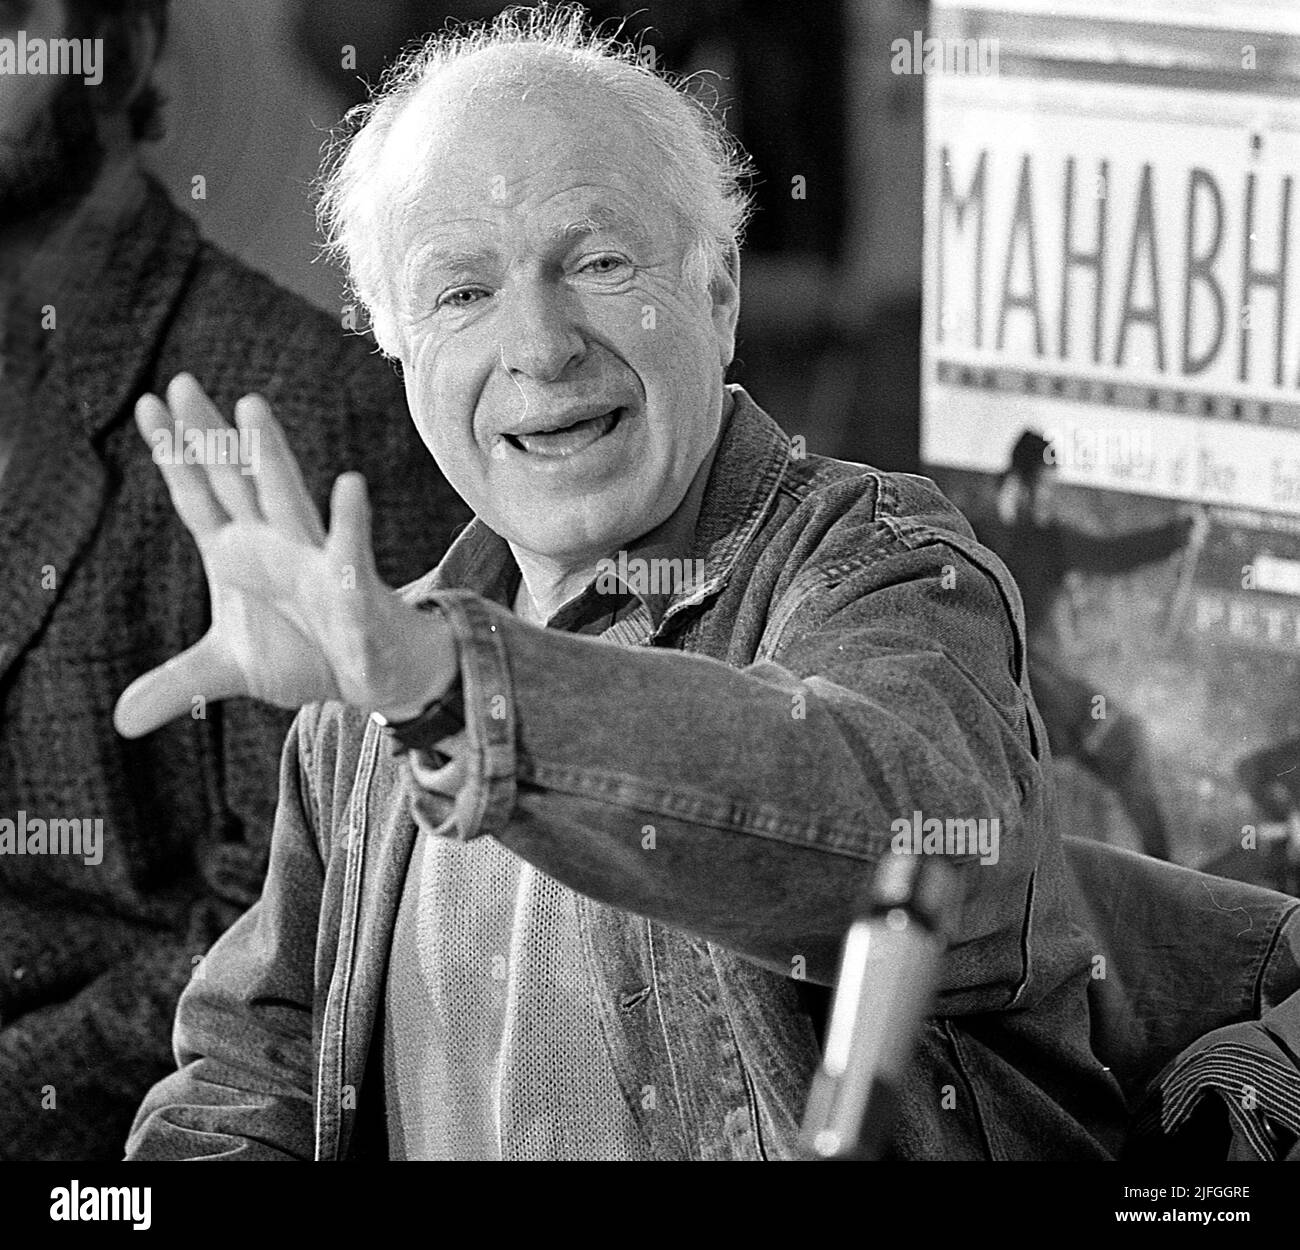 Peter Brook. World famous theatre and film director. Mahabharat on stage and Lord of the Flies on screen. ALAN WYLIE/ALAMY© Stock Photo